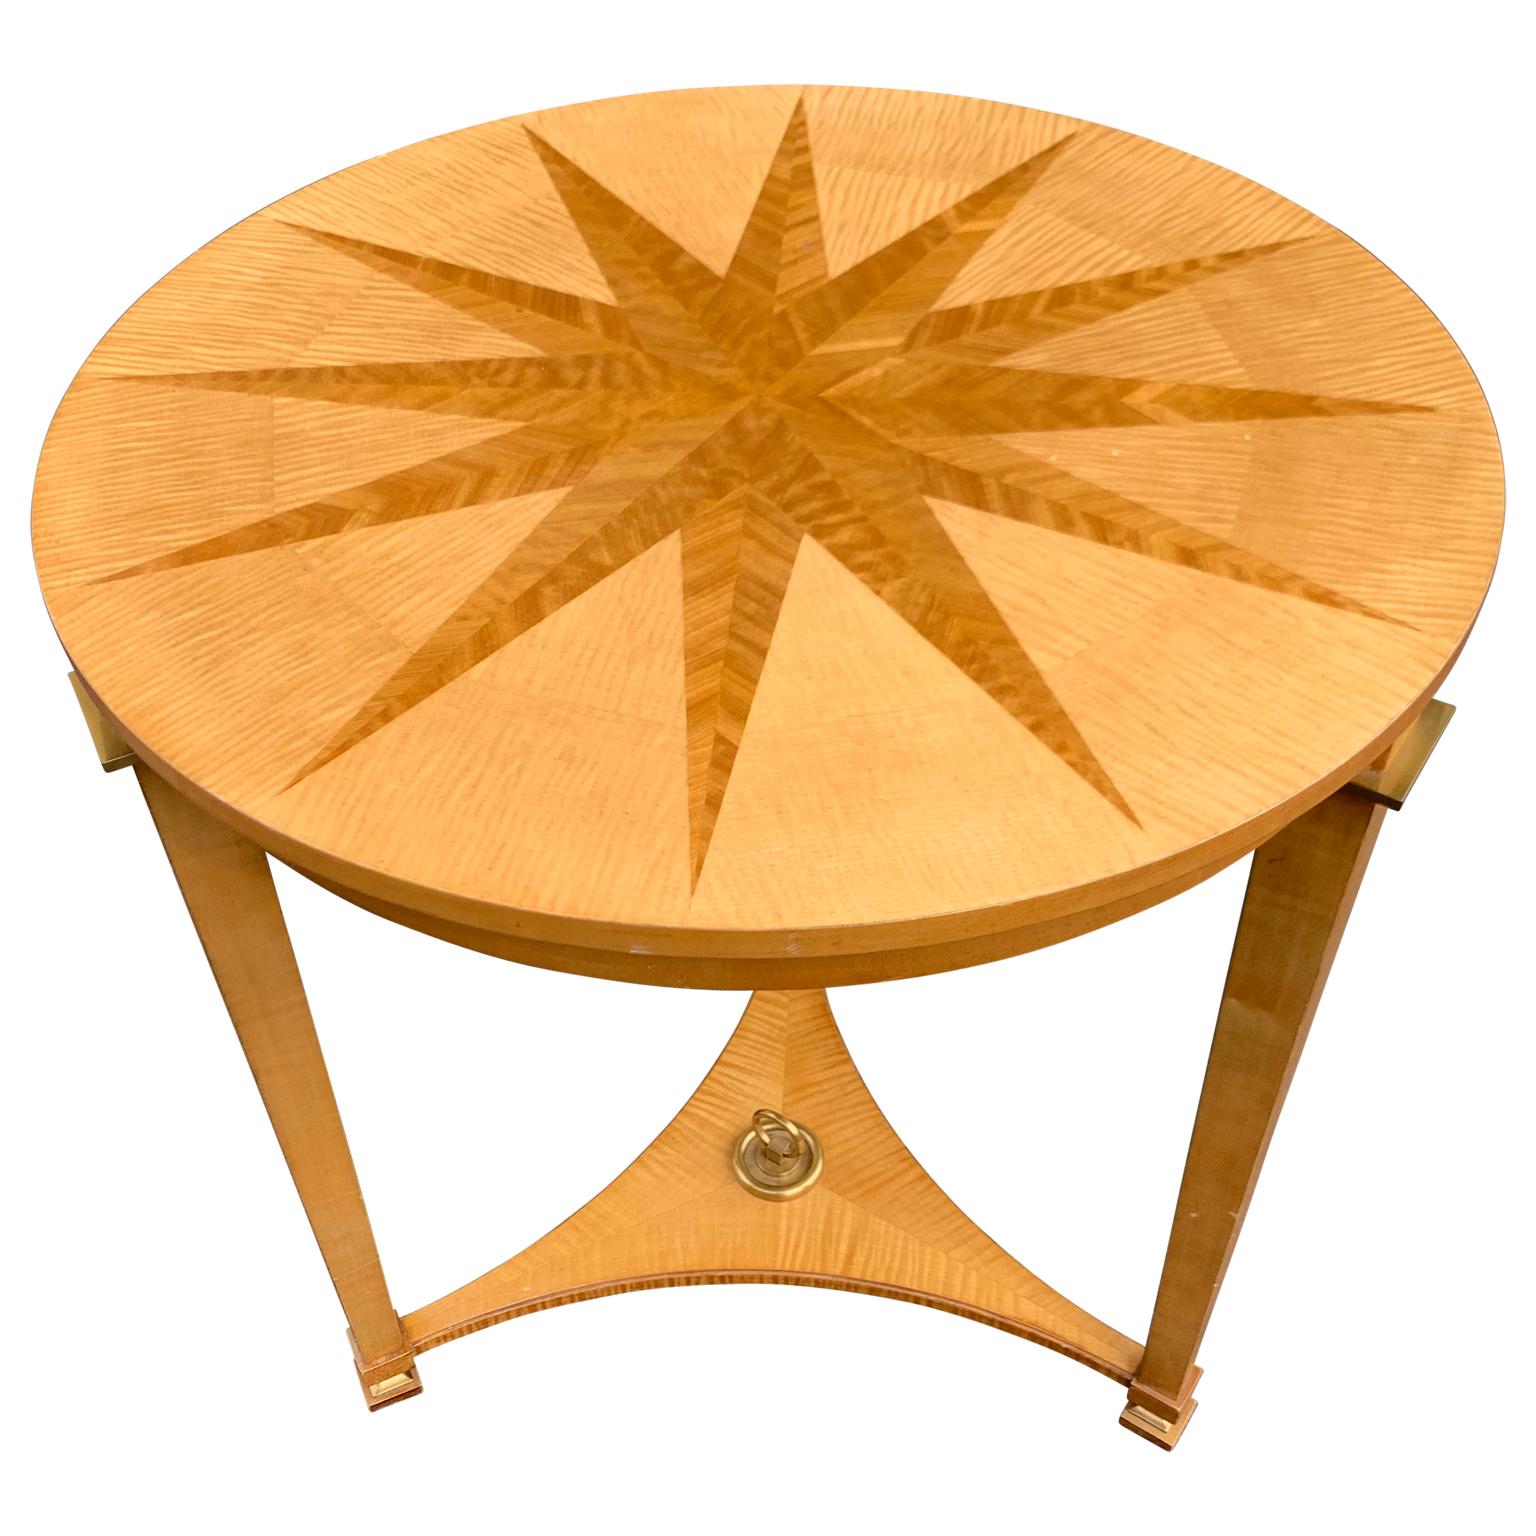 American Circular Midcentury Sunburst Inlaid Gueridon Table, the André Arbus Collection